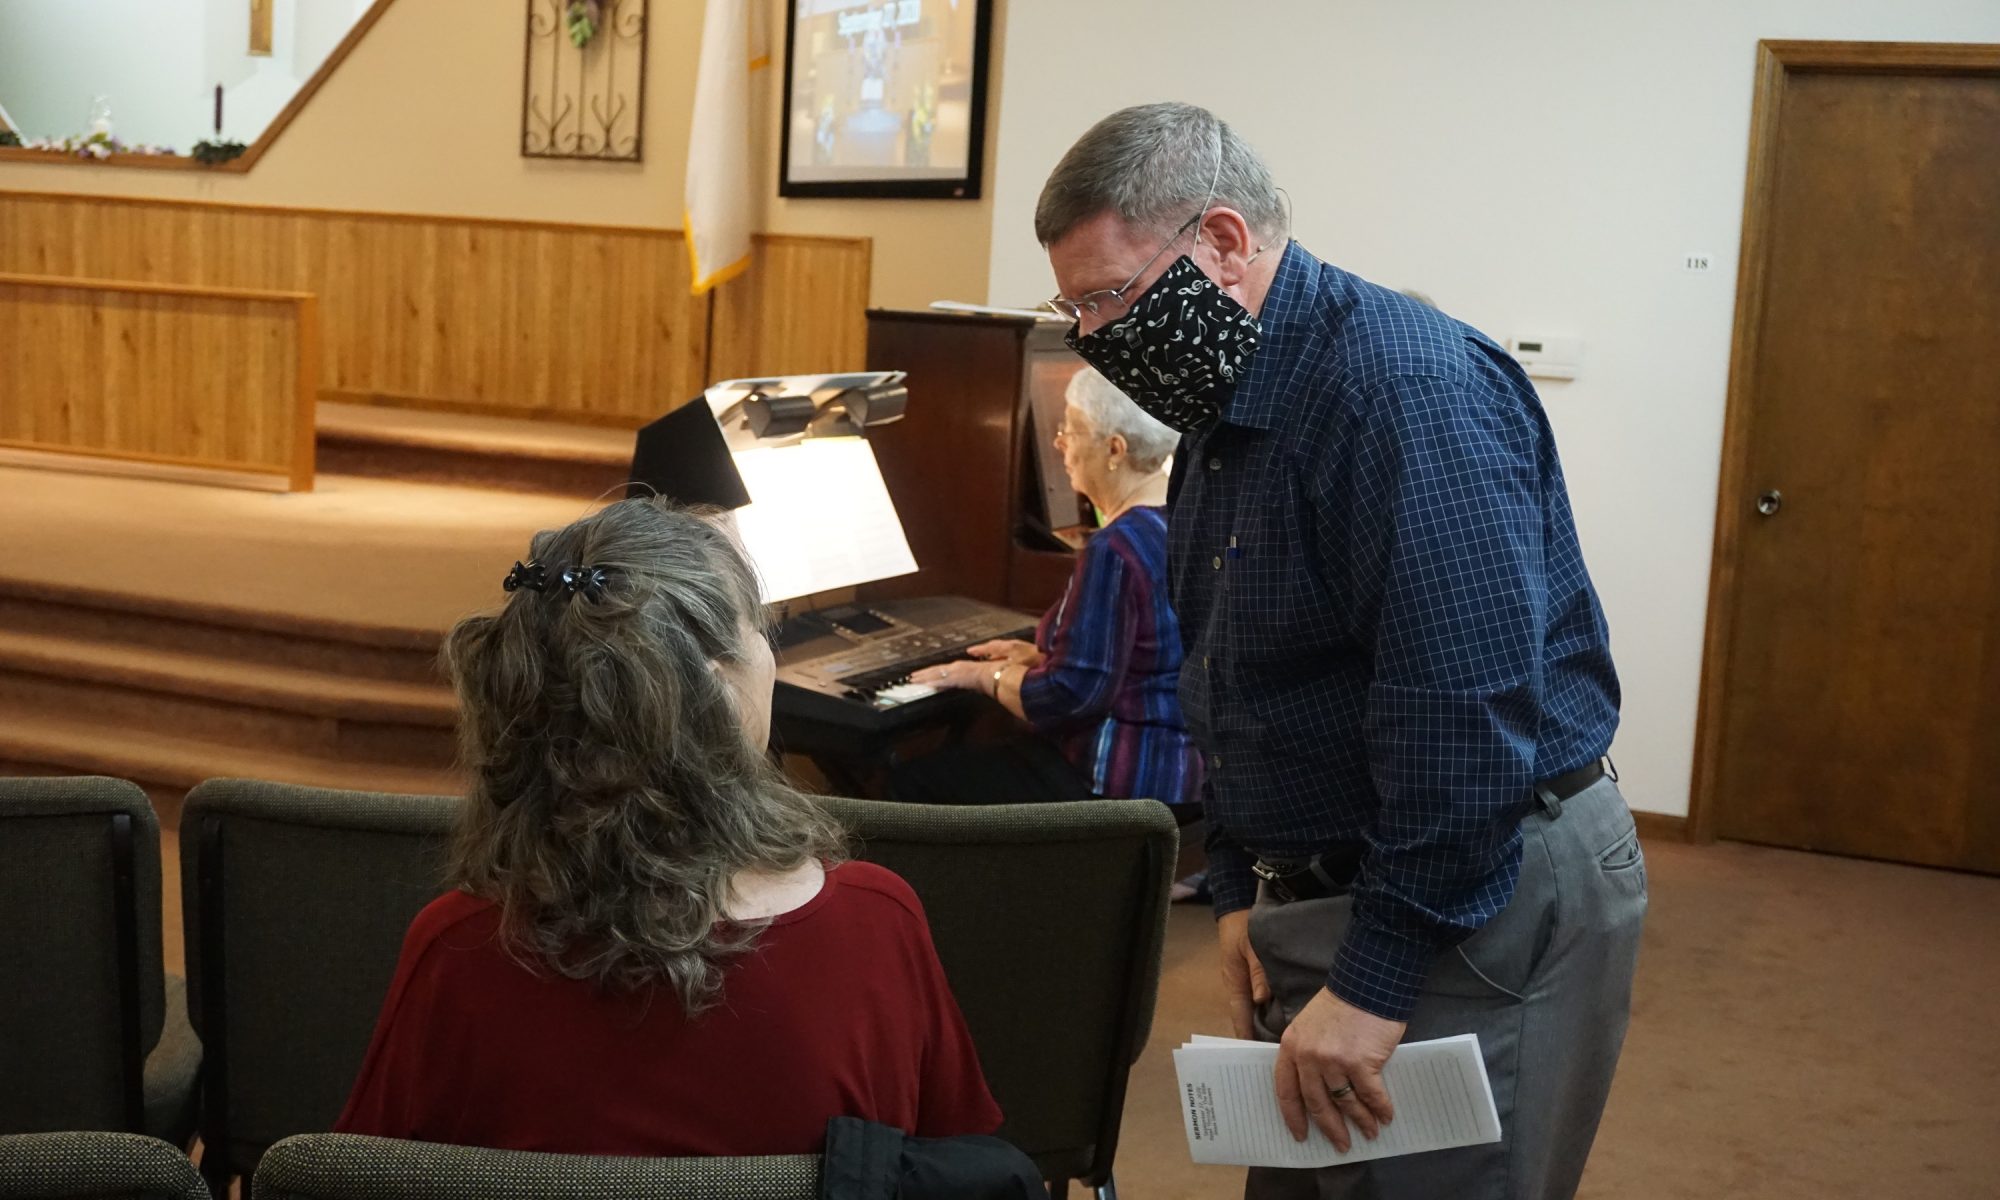 Pastor greeting a visitor during COVID days